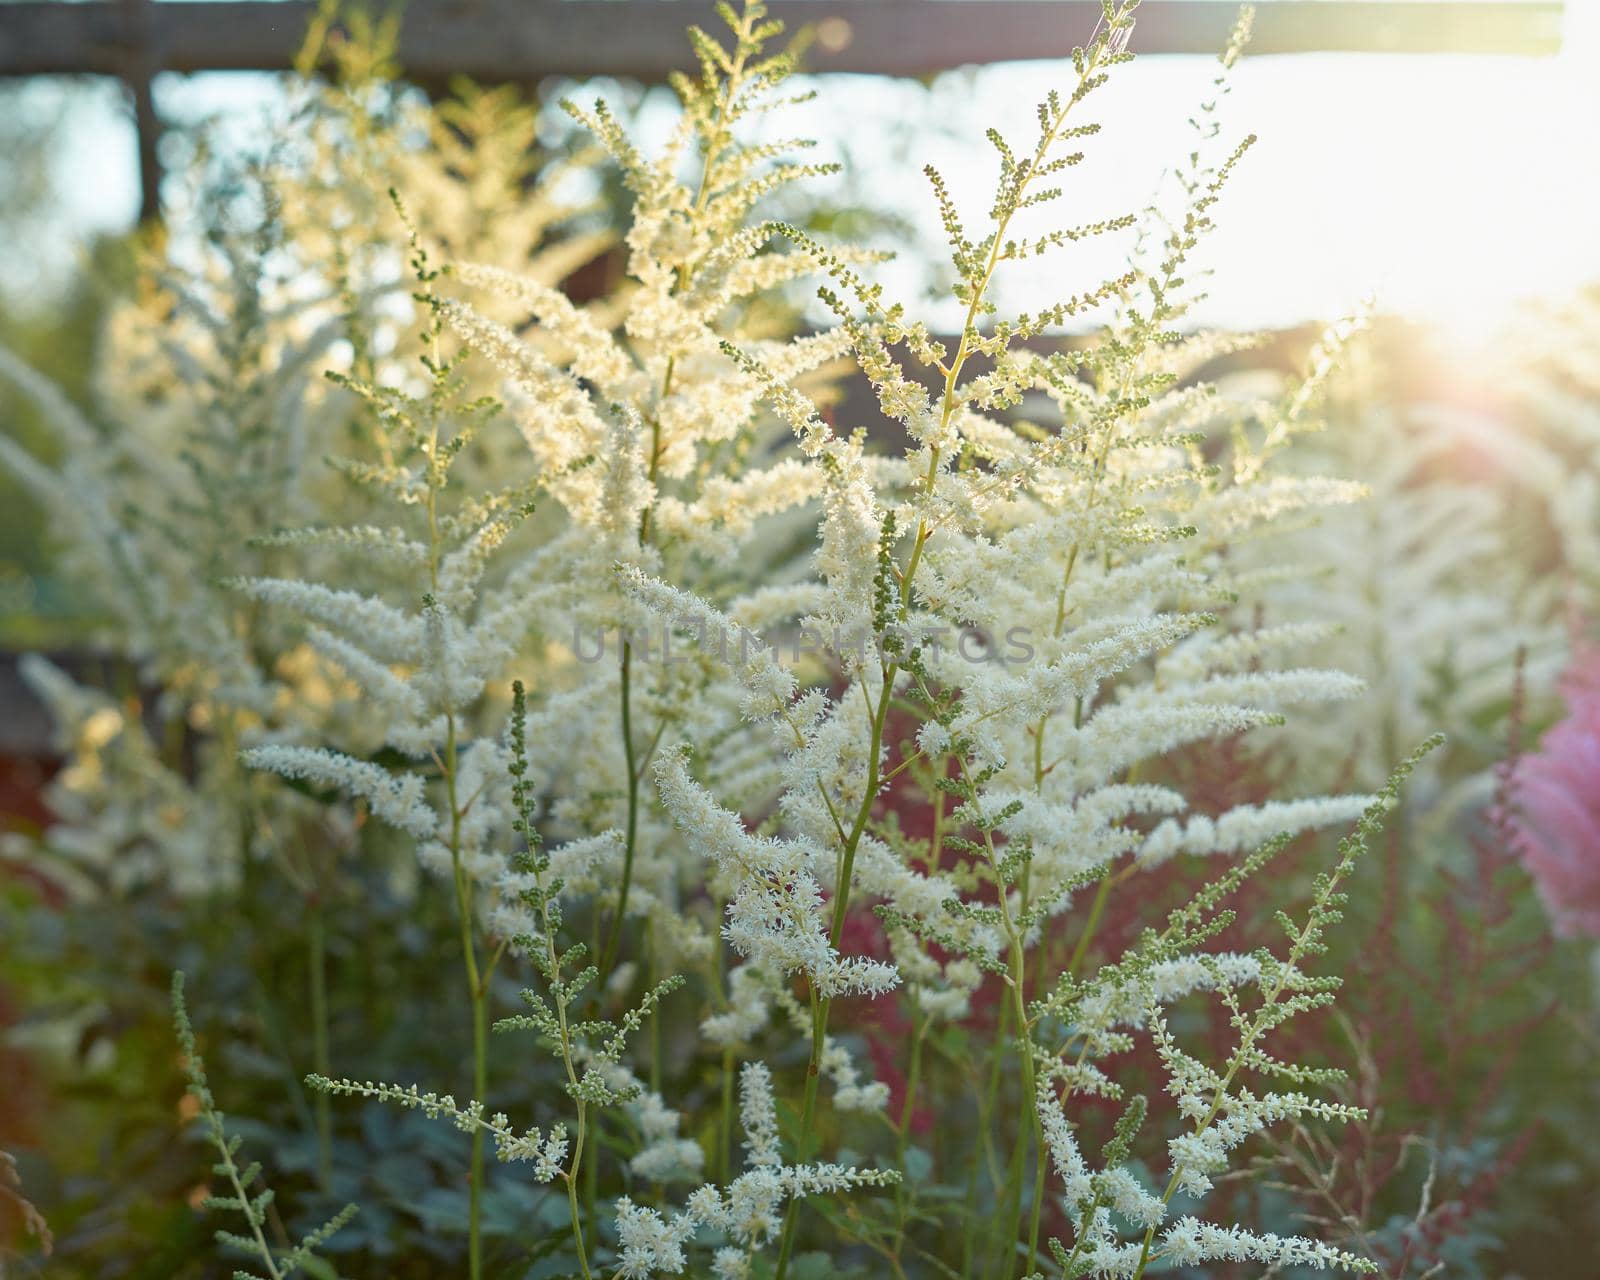 Beautiful Bush of flowers Astilbe with a fluffy white panicles by NataBene